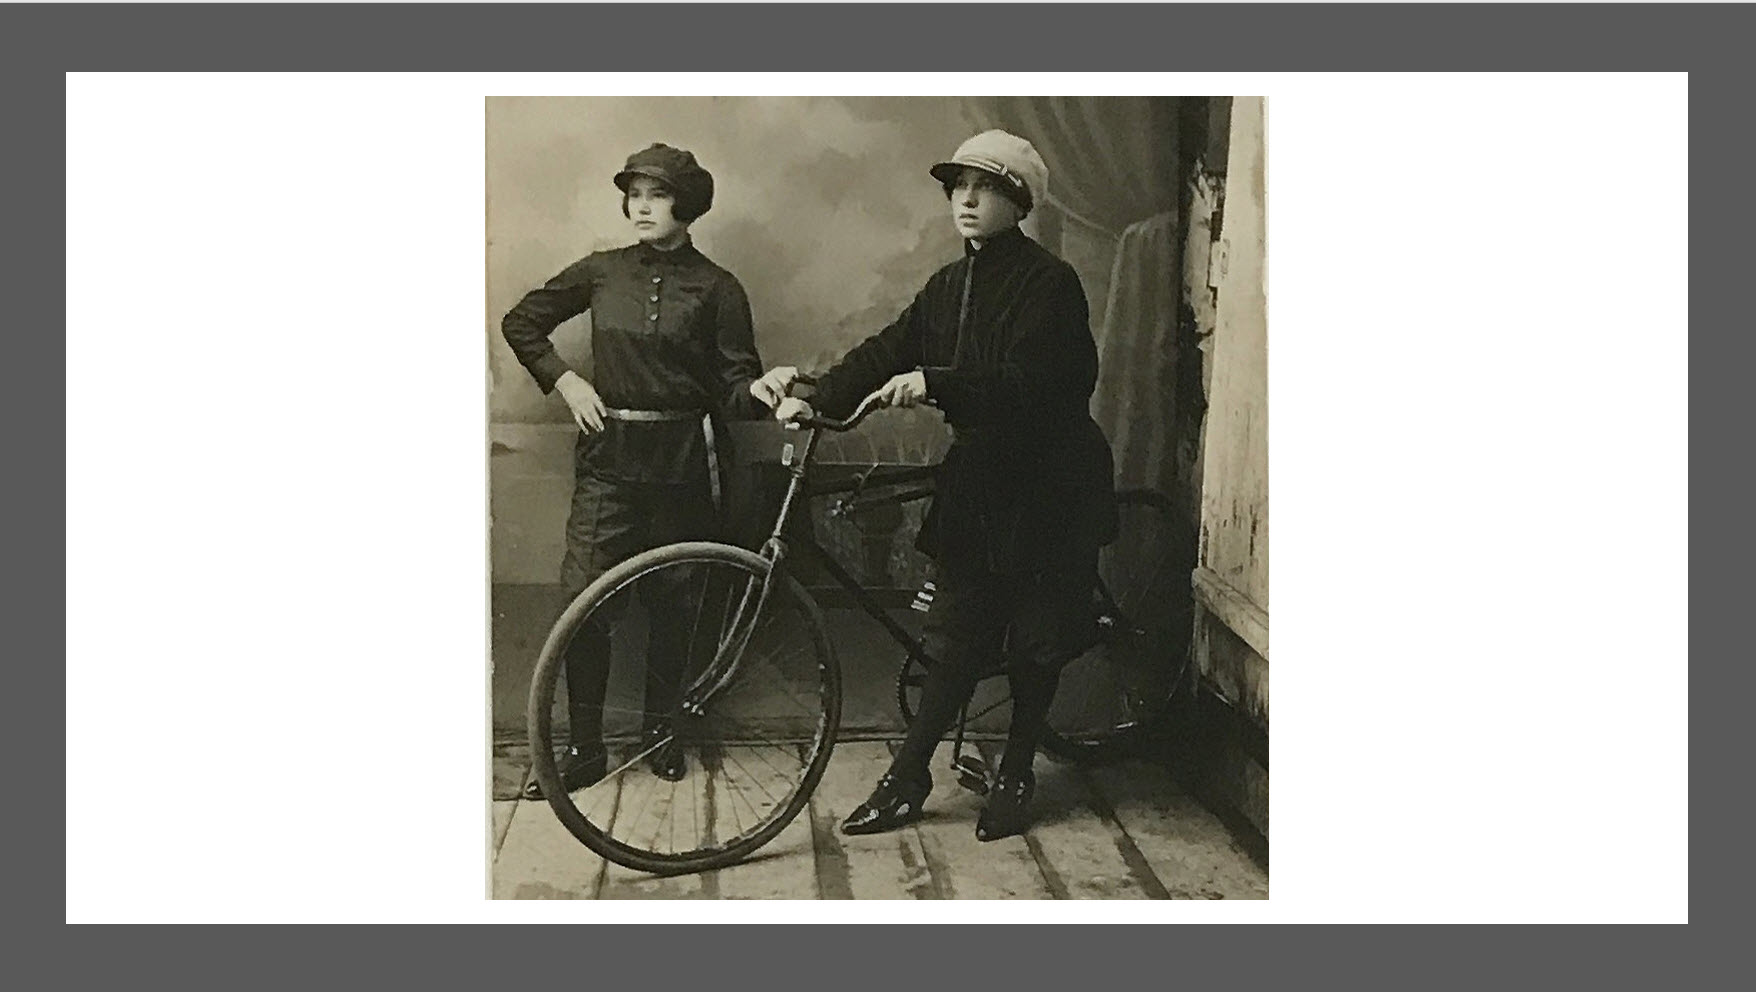 Amelia Shargel (left) and Charna Goldseker (right) 1925